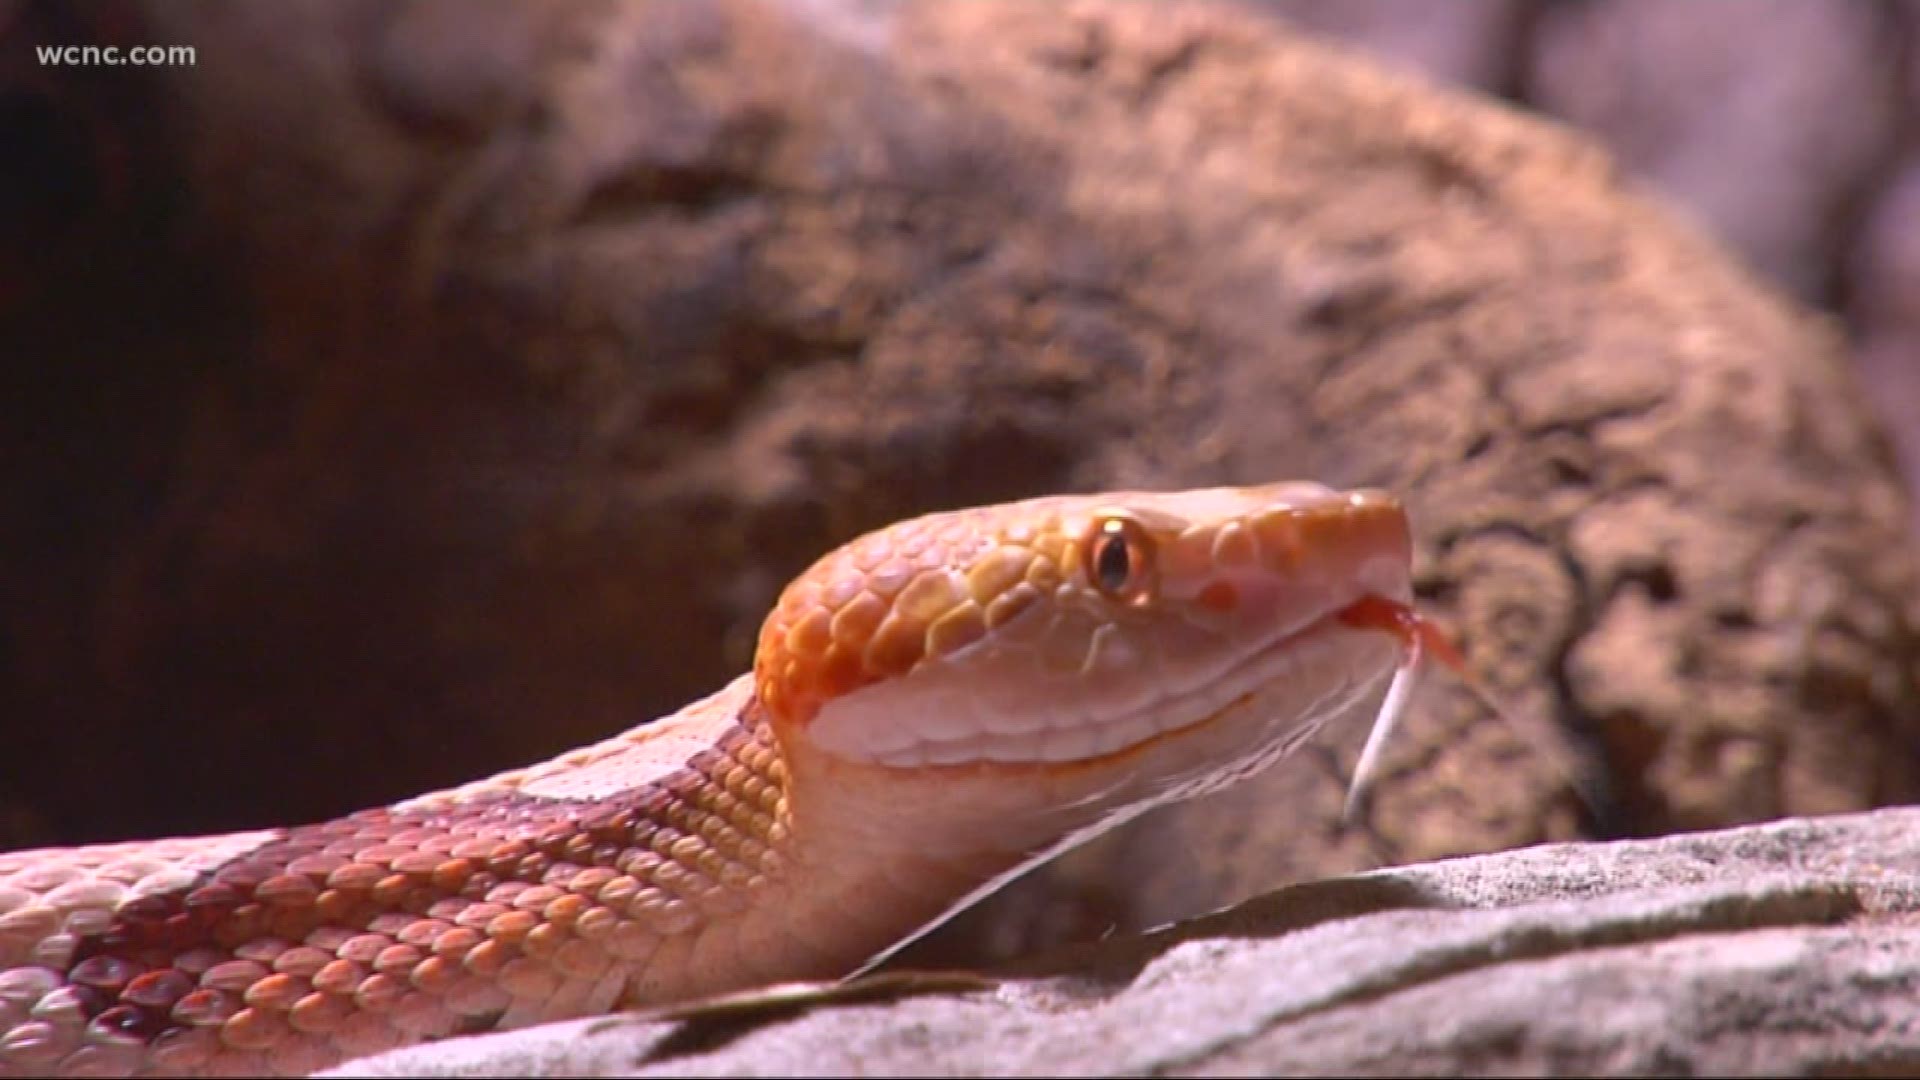 Carolina Poison Control says they received more snake calls in September than any other month this year.